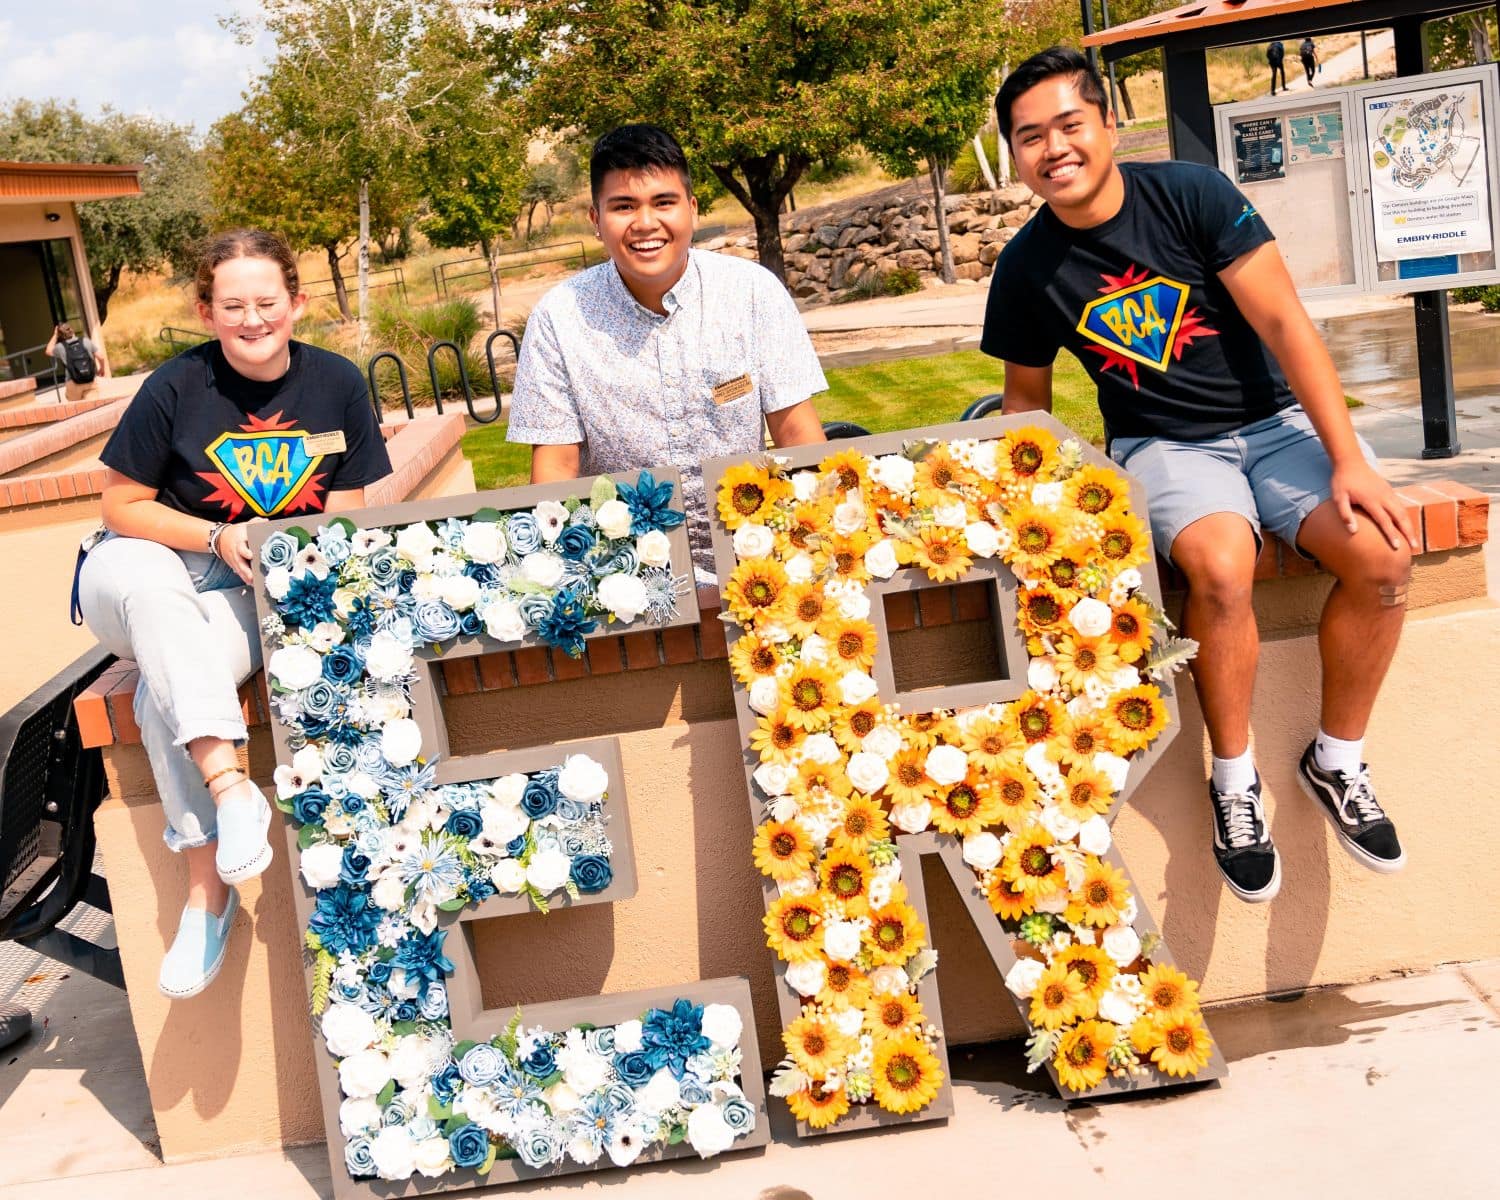 Students gather to celebrate campus diversity. (Photo: Embry-Riddle / Connor McShane)